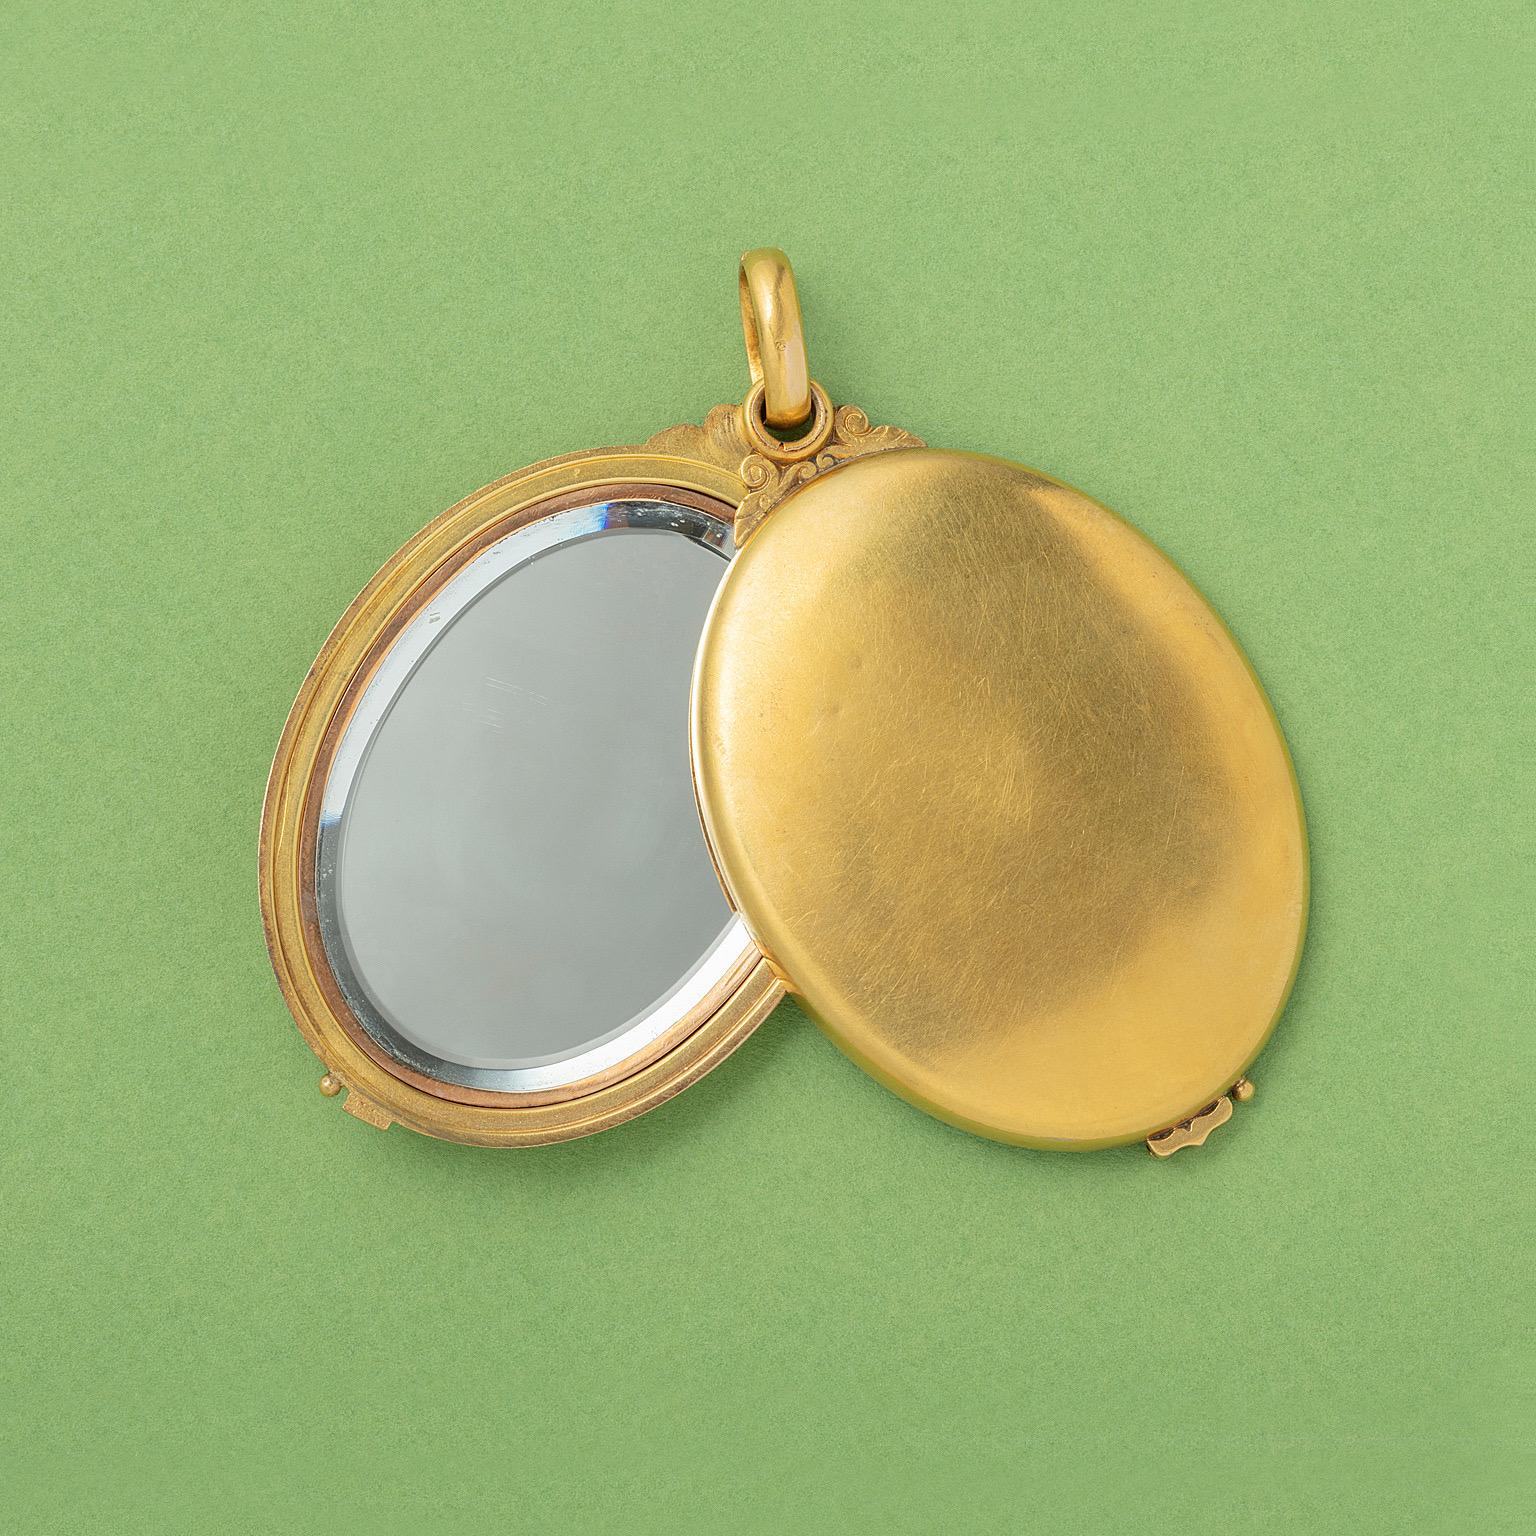 Lockets have a magical way of preserving moments close to the heart. They can become a vessel for the memories you hold dear. Whether it's a photo of a loved one, a tiny keepsake, or a hidden message, a locket adds an extra layer of sentimentality.